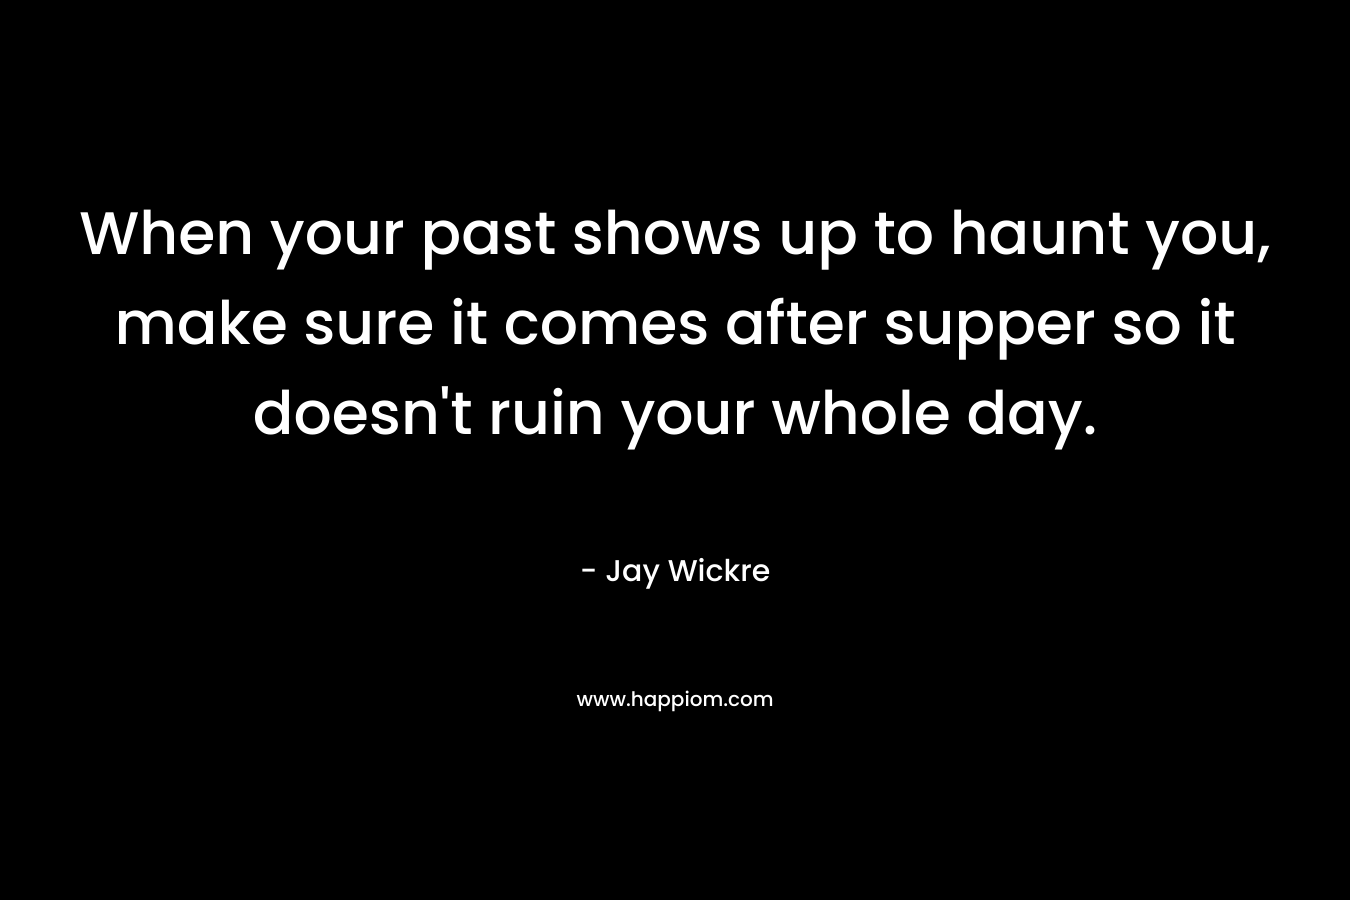 When your past shows up to haunt you, make sure it comes after supper so it doesn’t ruin your whole day. – Jay Wickre